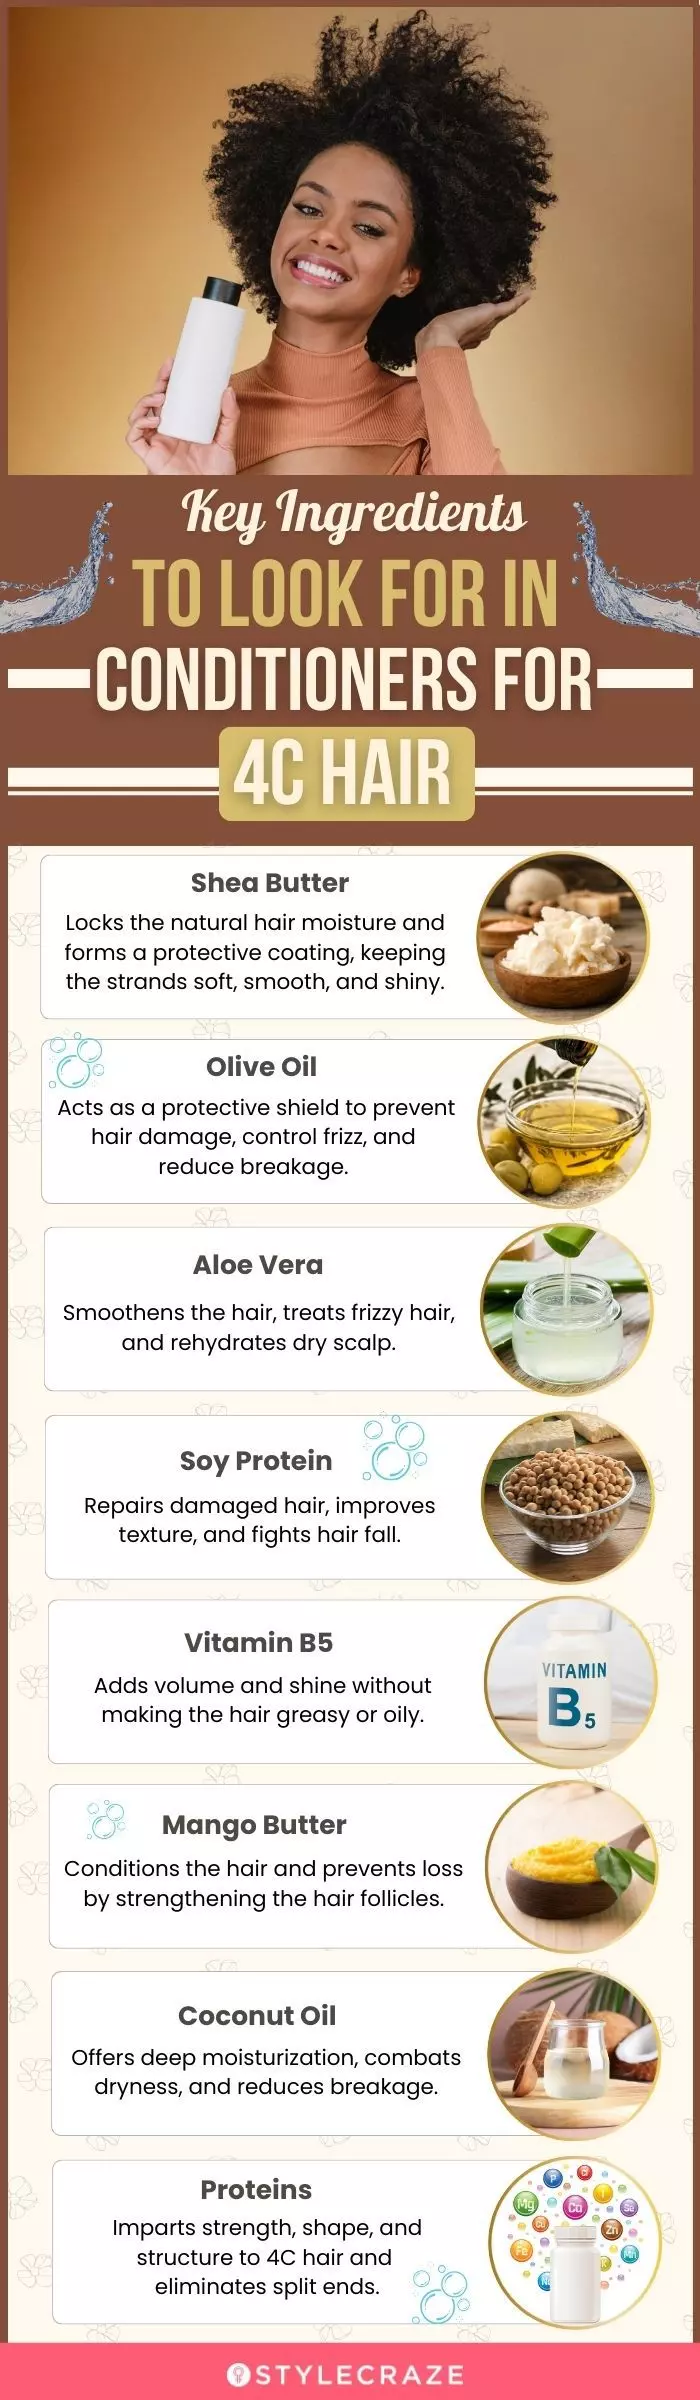 Key Ingredients To Look For In Conditioners For 4C Hair(infographic)